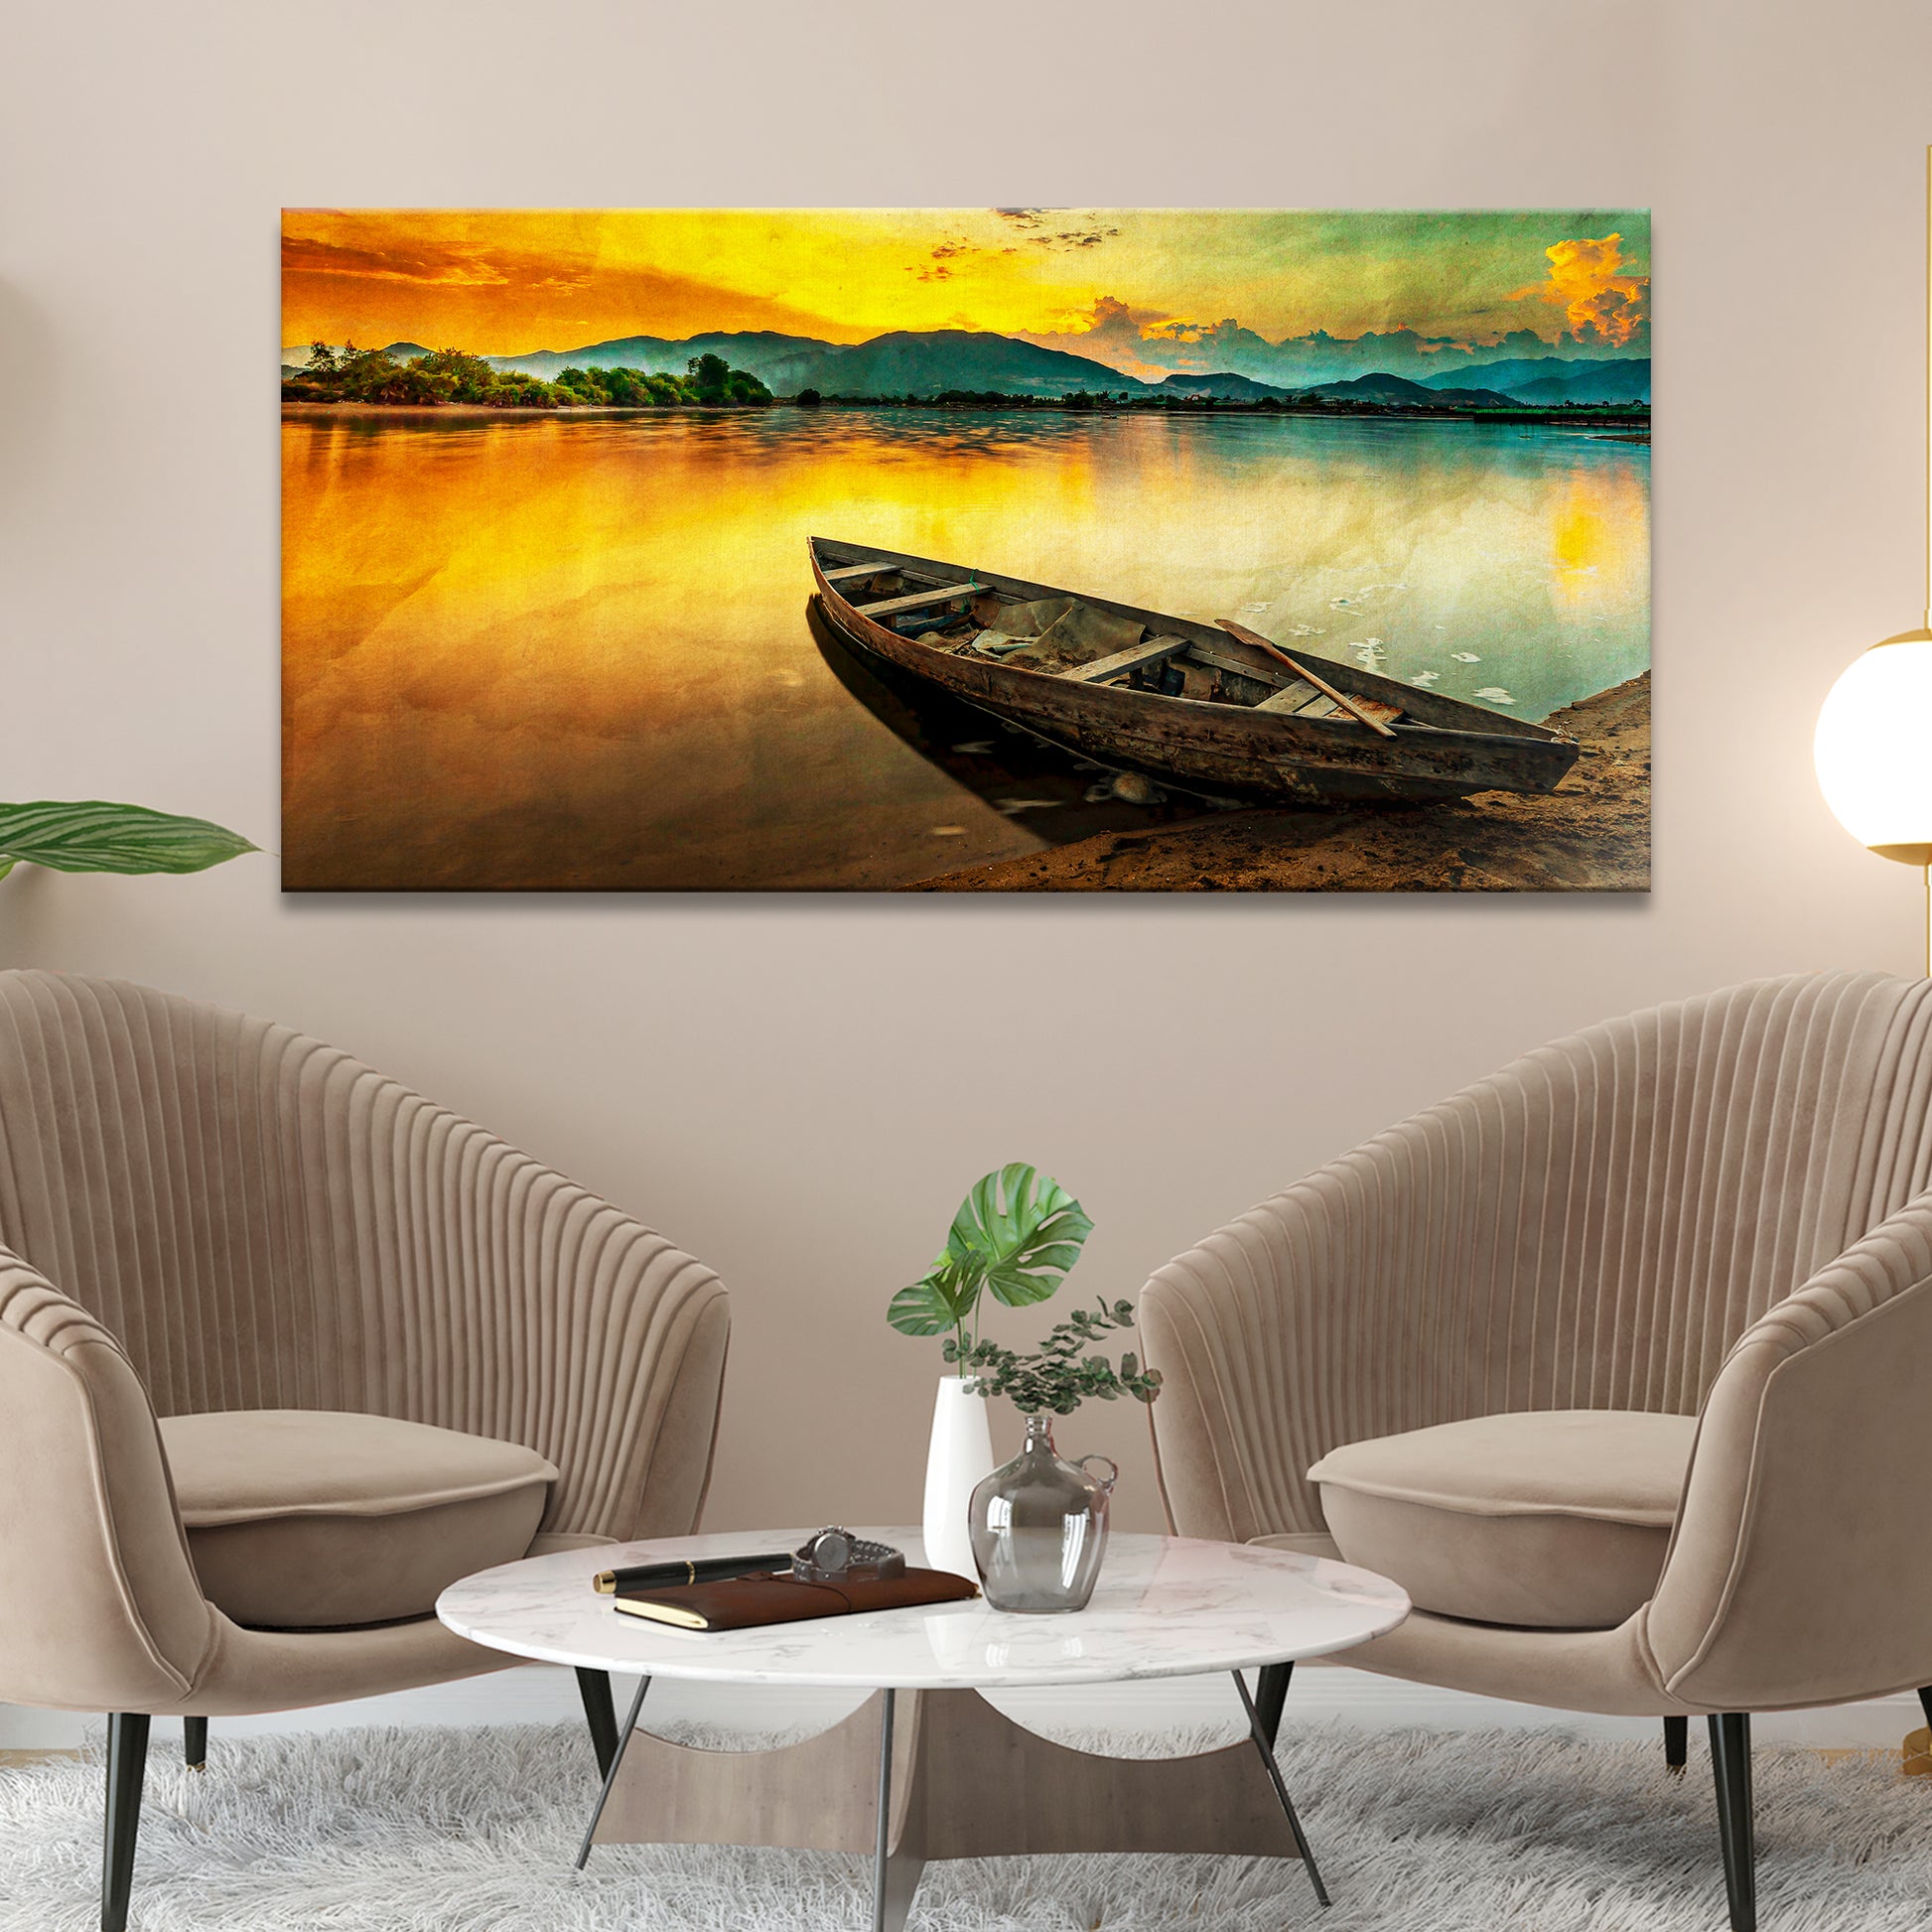 Abandoned Boat By The River At Sunset Wall Art - Image by Tailored Canvases